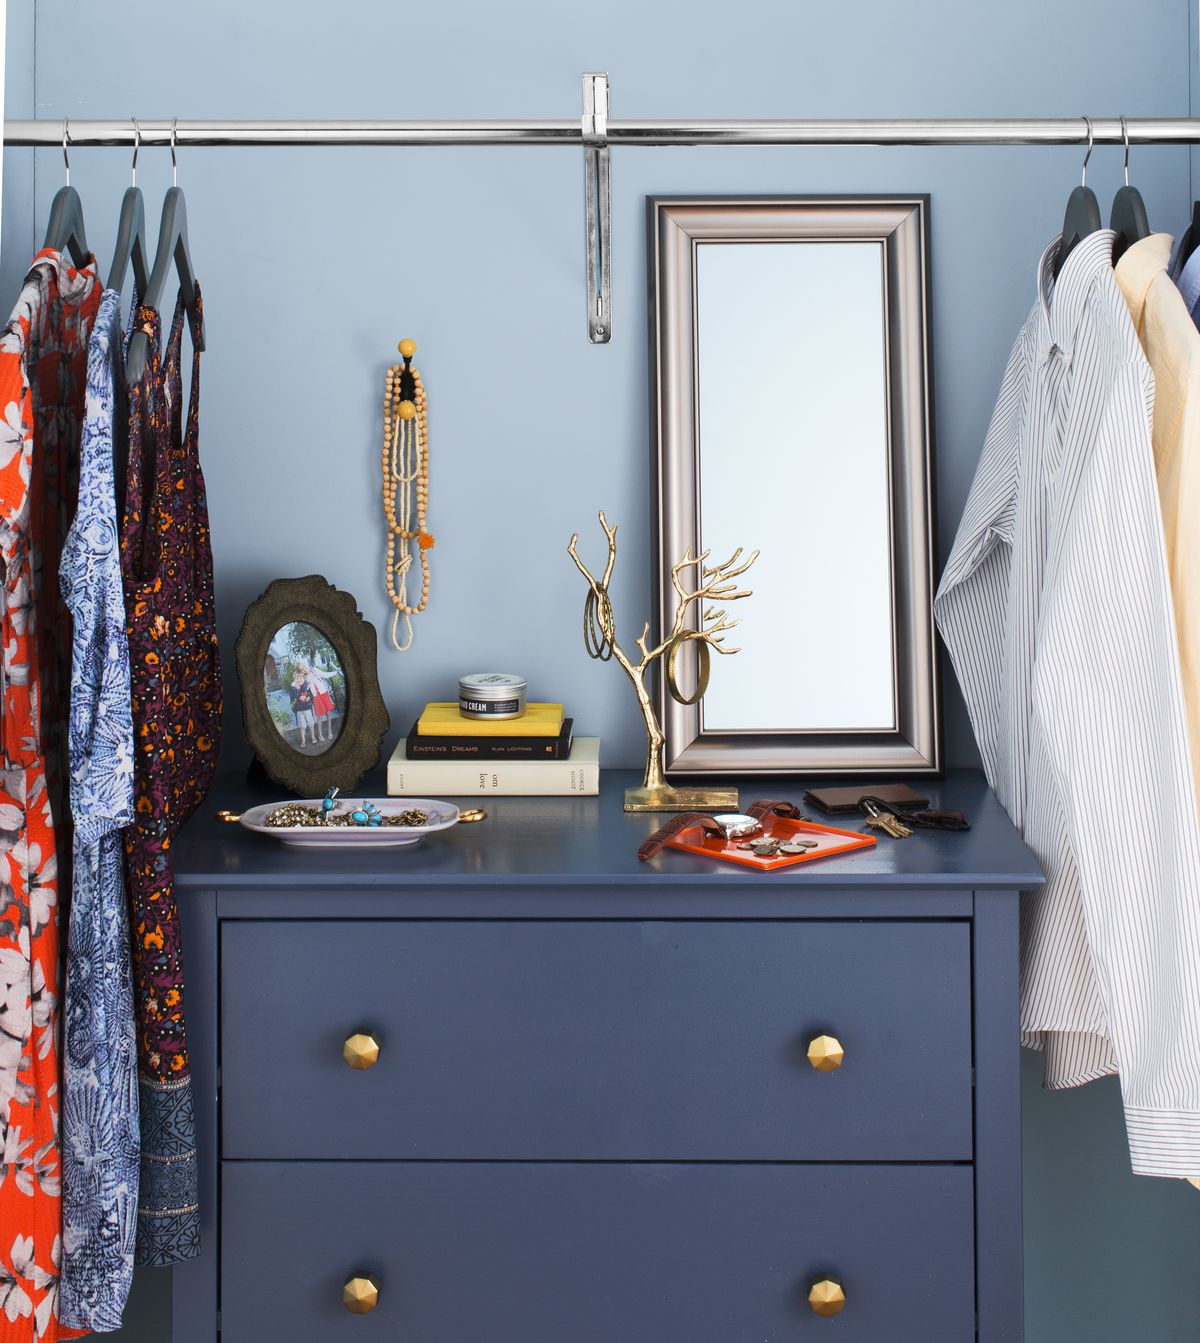 Repurpose a Chest when planning to redo your bedroom closet